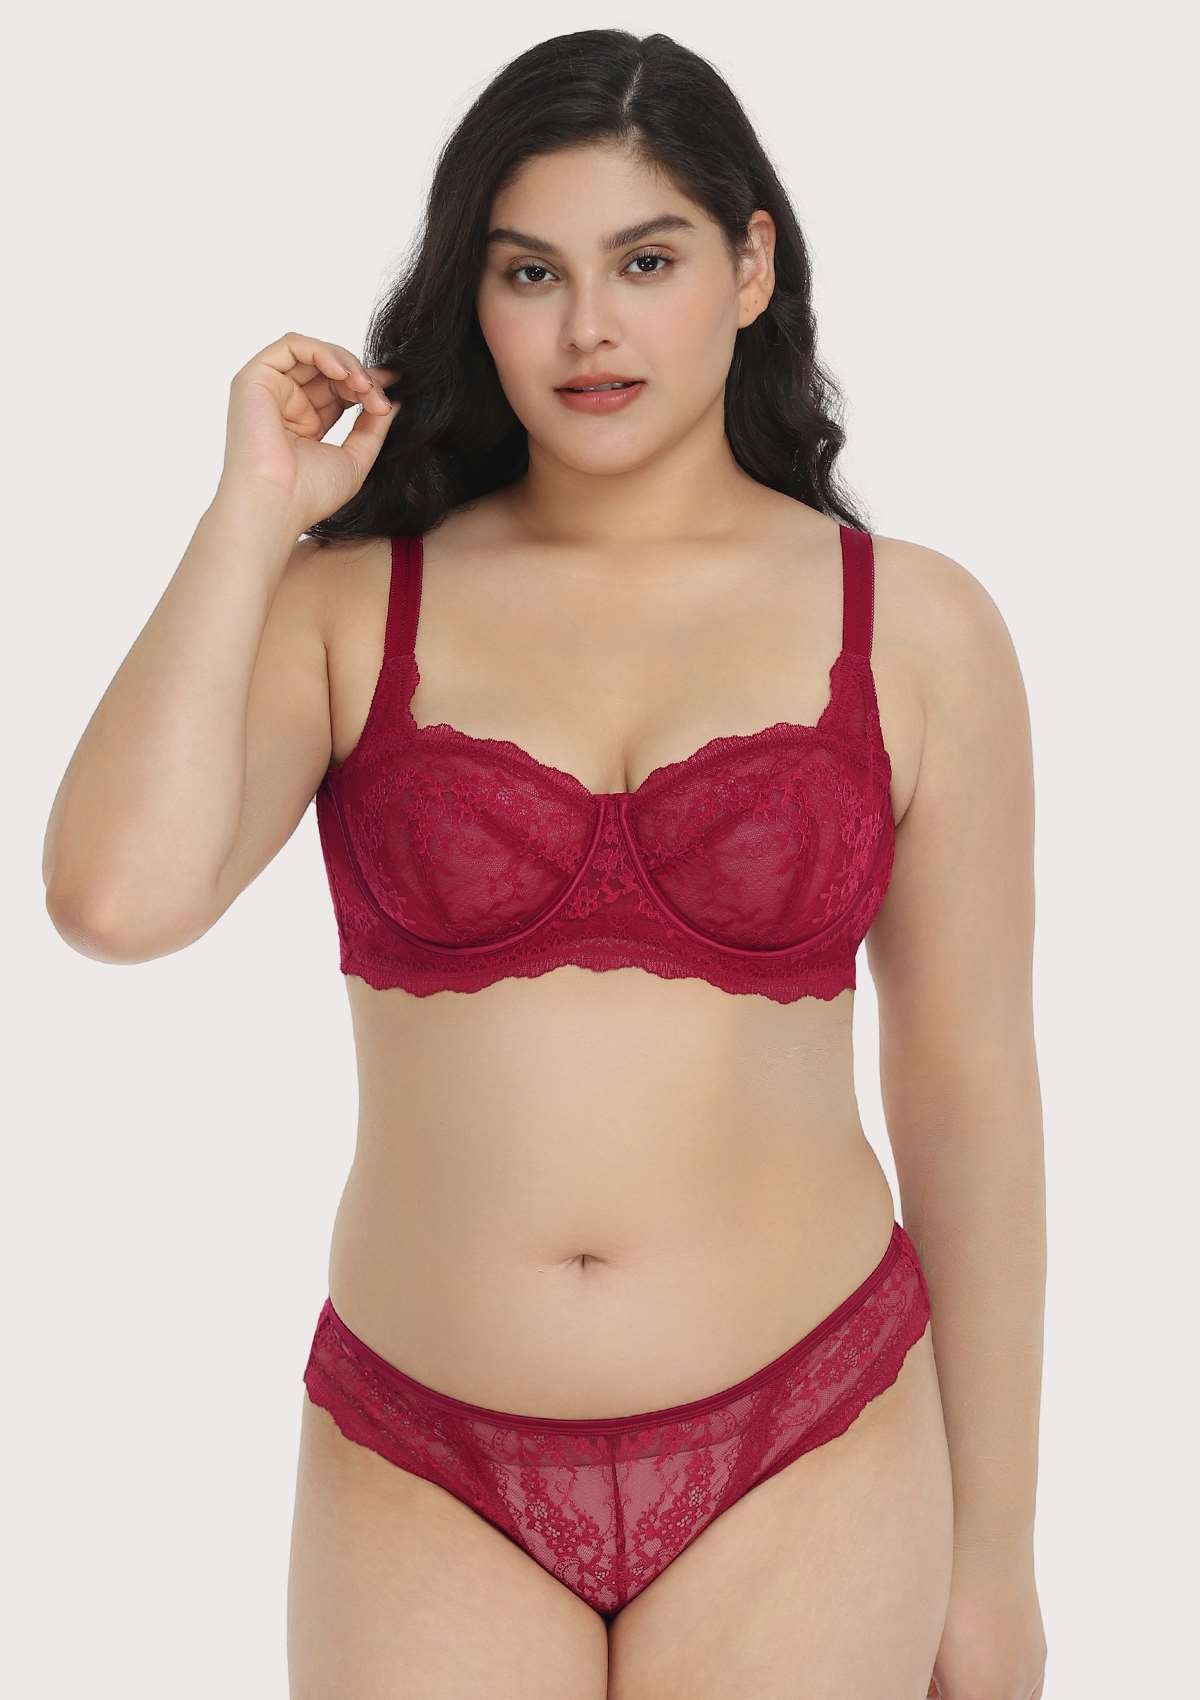 HSIA Floral Lace Unlined Bridal Balconette Bra Set - Supportive Classic - Burgundy / 40 / DDD/F